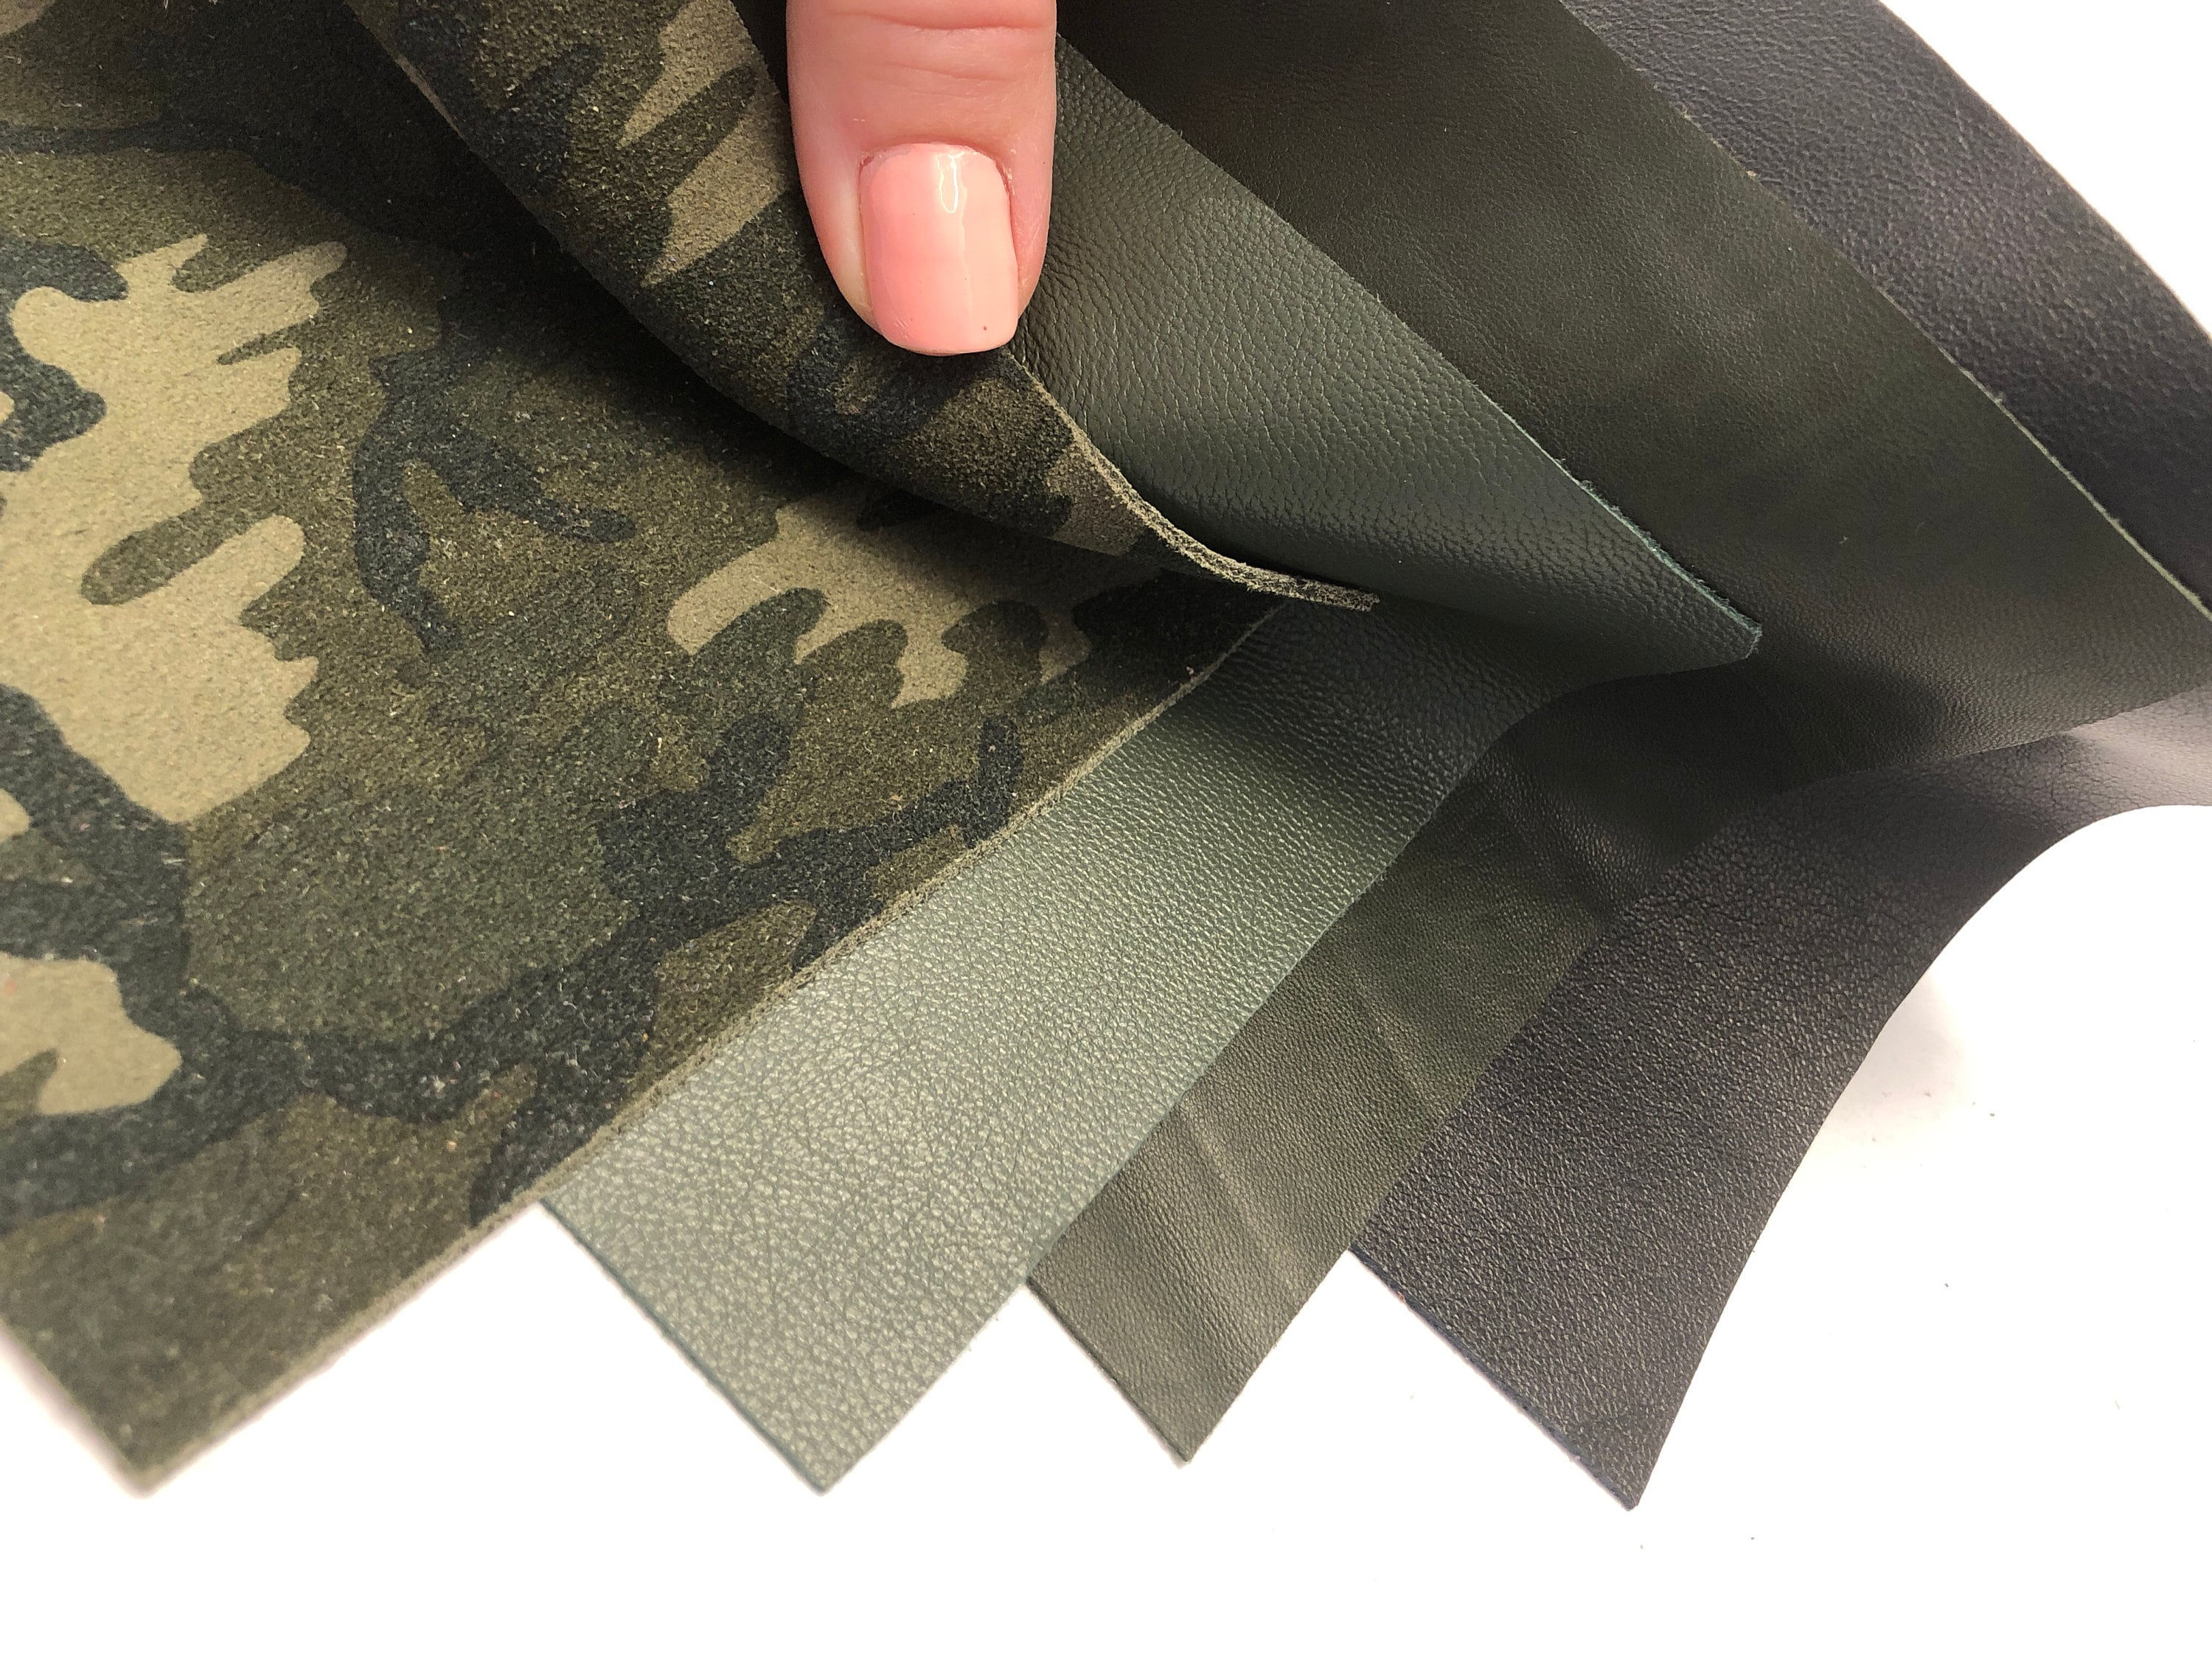 Buy Leather CAMOUFLAGE OLIVE Black Genuine Leather and Suede, Soft  Lightweight Leather in Black, Olive, Dark Olive, Camo Print Calfskin Suede  Online in India 